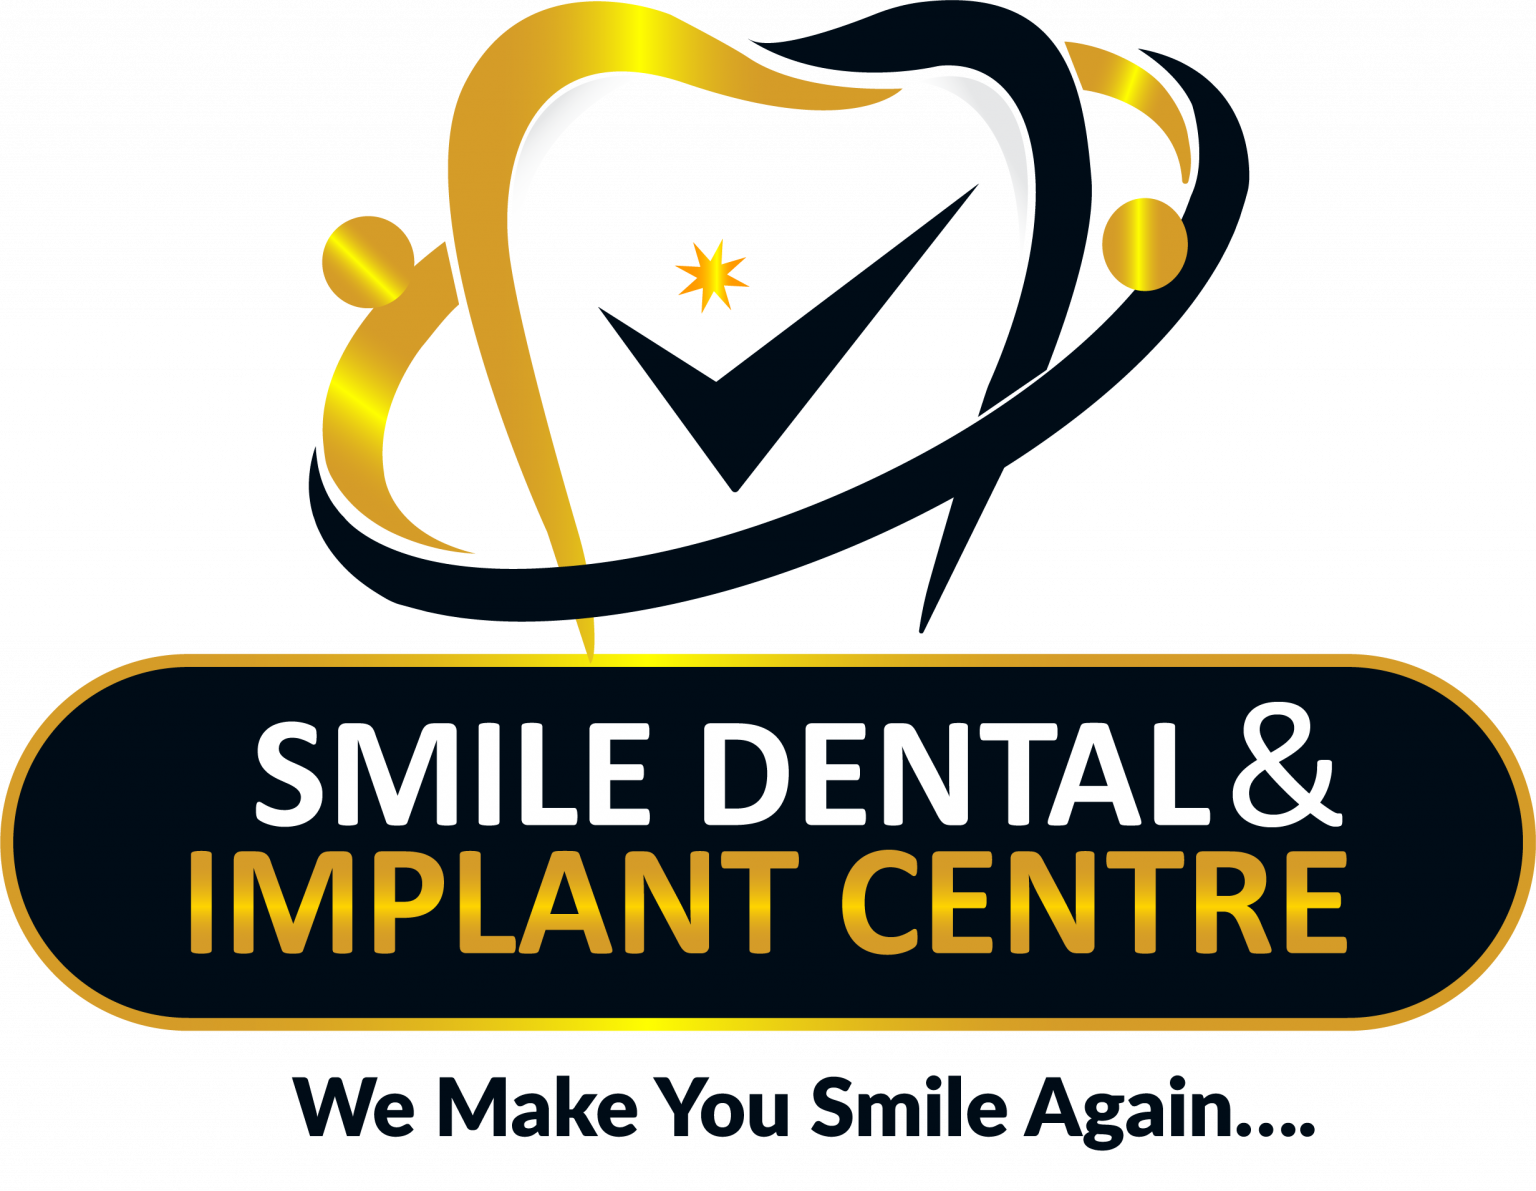 Smile Dental and Implant Centre|Hospitals|Medical Services